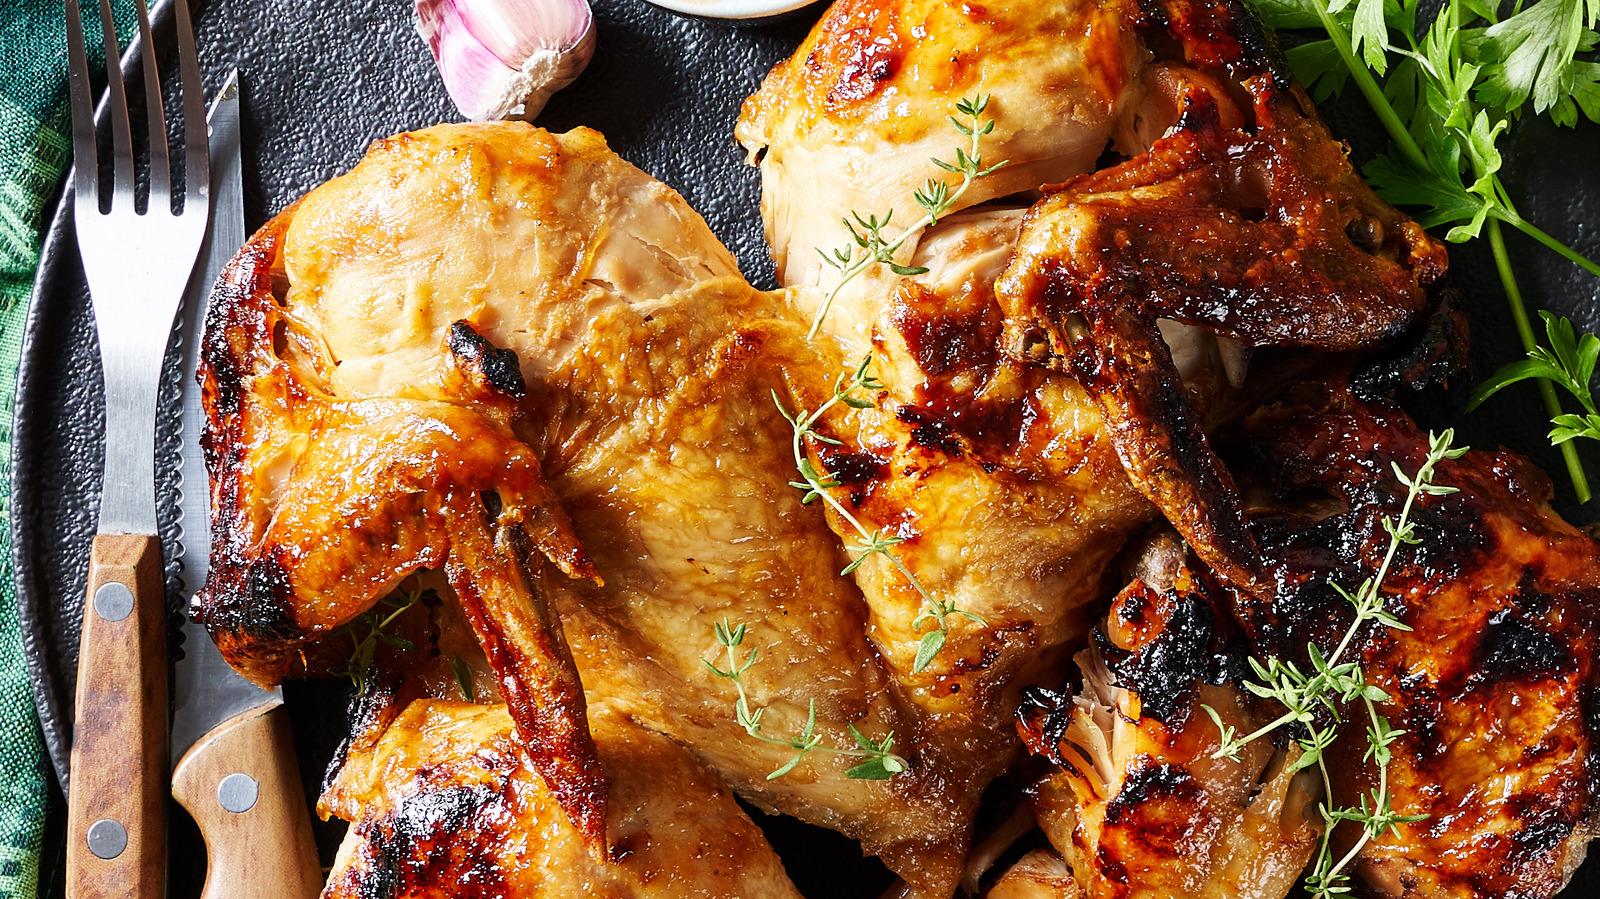 Everything you need to know about chicken salt